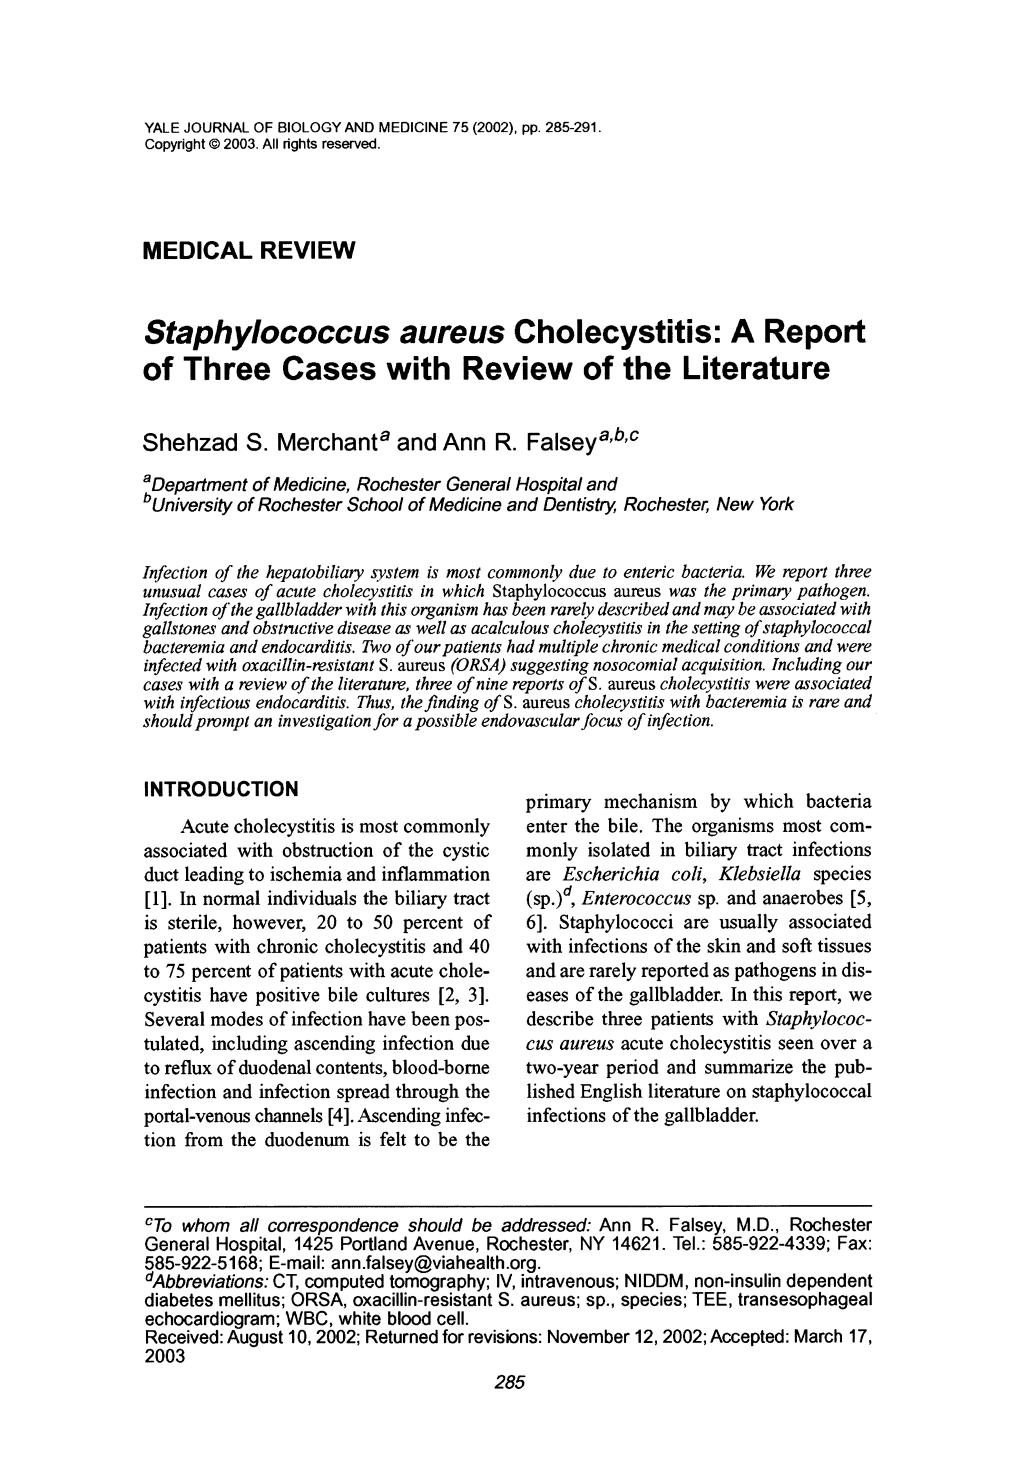 Staphylococcus Aureus Cholecystitis: a Report of Three Cases with Review of the Literature